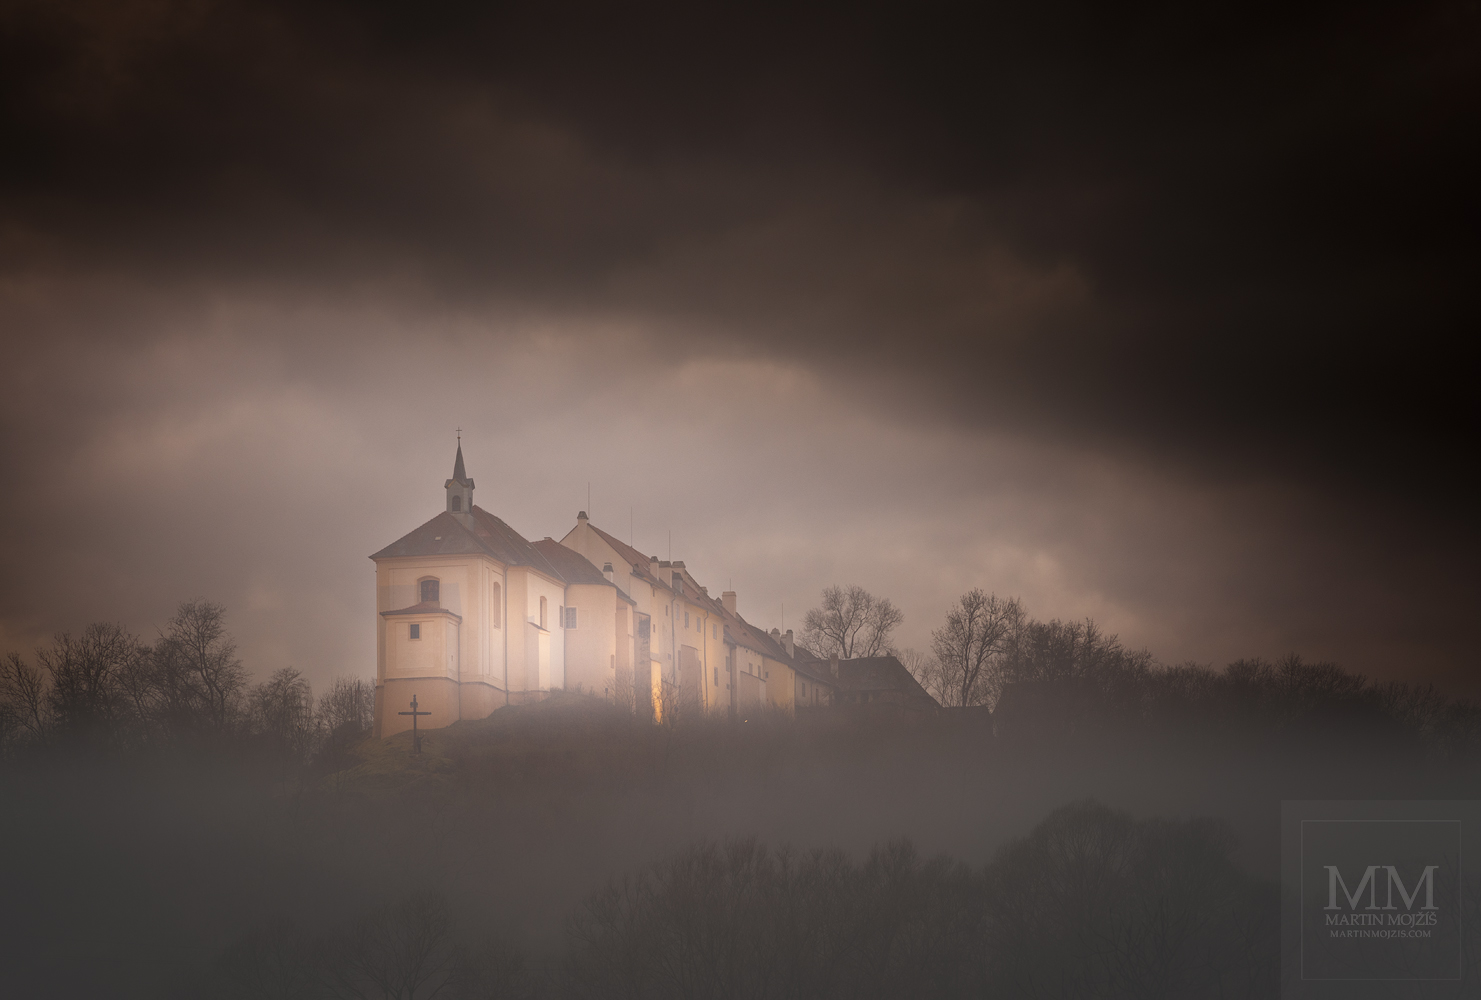 Large format fine art photograph of the chateau on a foggy high hill. Martin Mojzis.